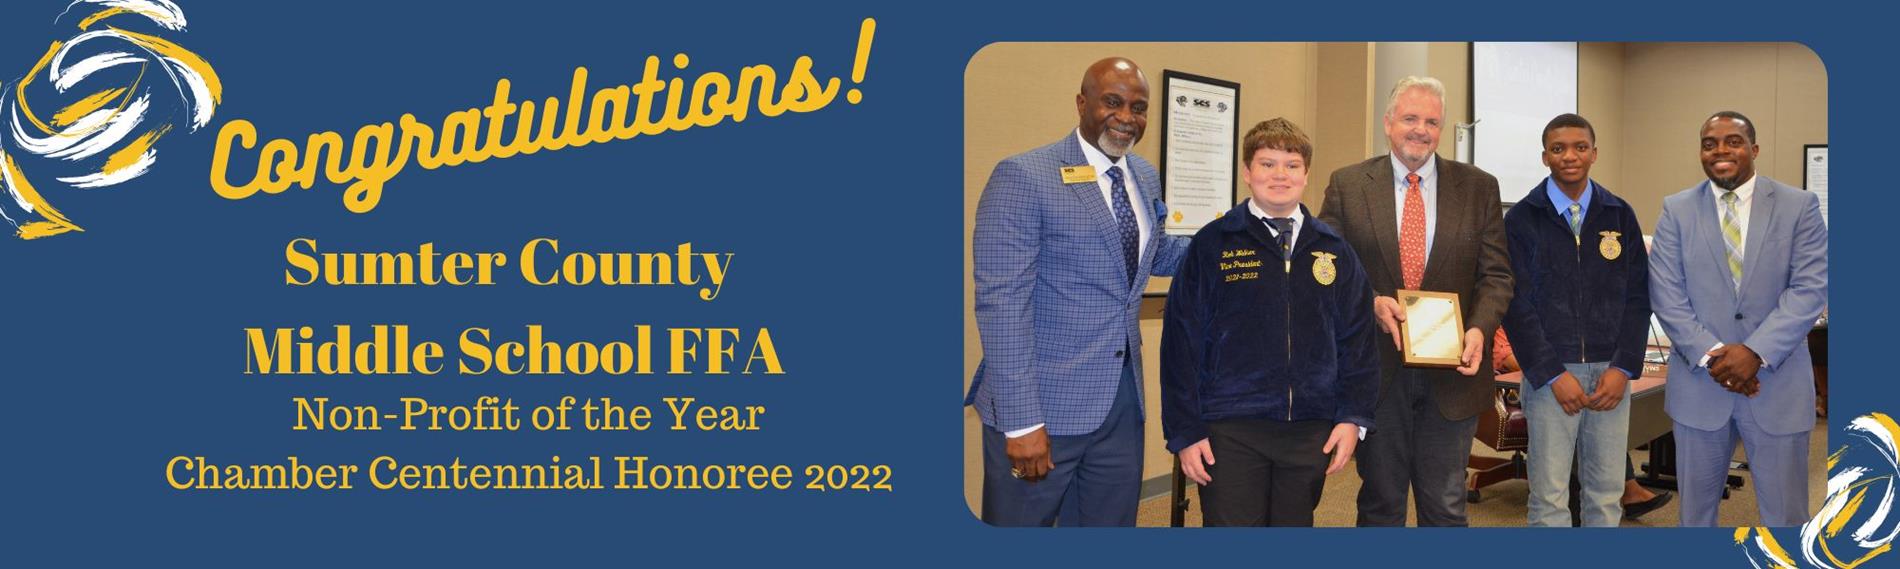 SCMS FFA - Non-Profit of the Year Chamber Centennial Honoree 2022